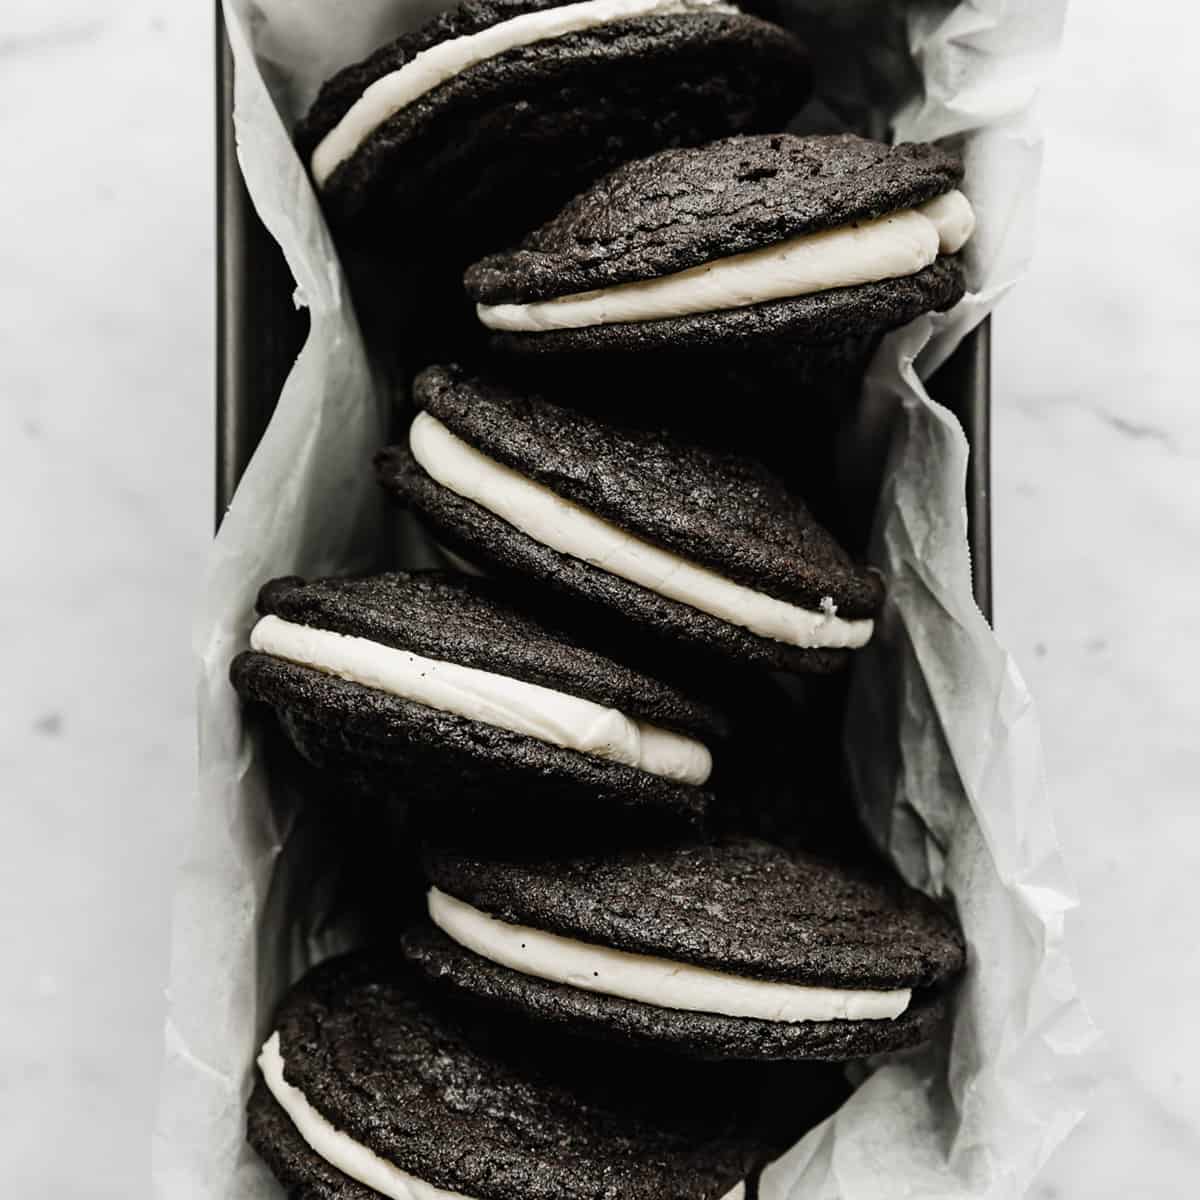 Homemade Oreo Sandwich Cookies in a parchment lined bread pan.